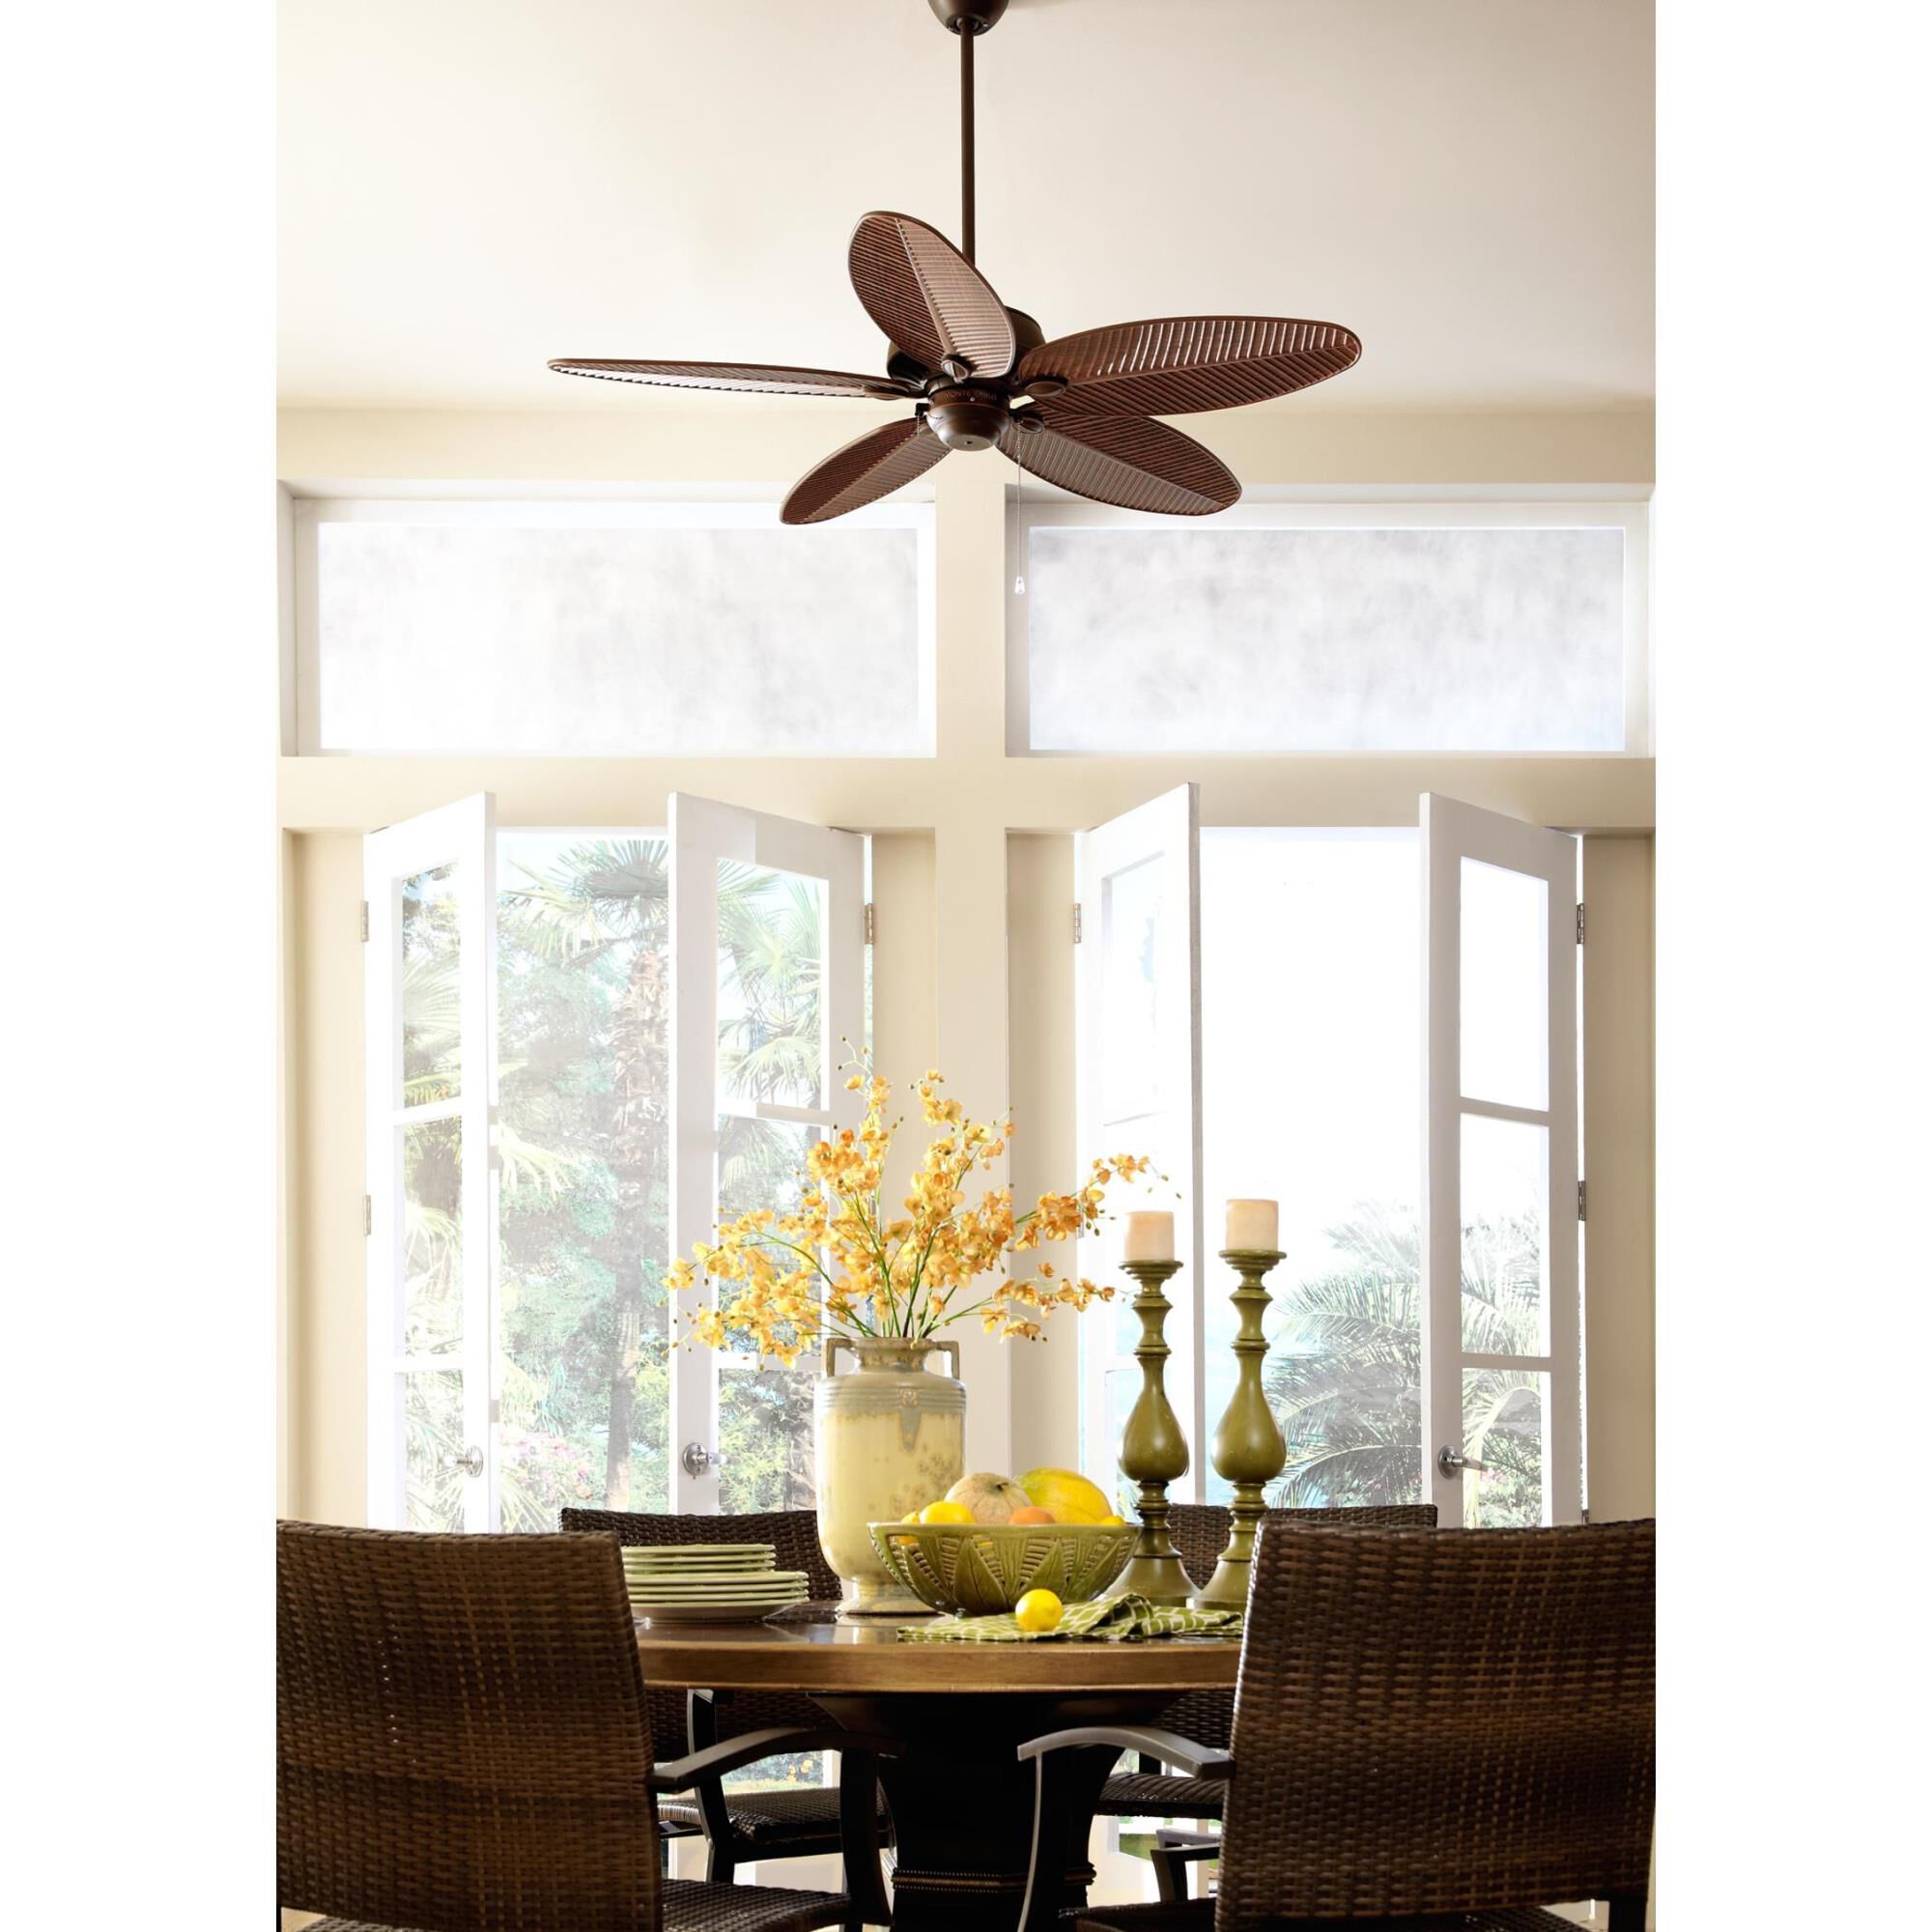 Cruise Outdoor Rated 52 Inch Ceiling Fan by Monte Carlo Fan | Capitol Lighting 1800lighting.com